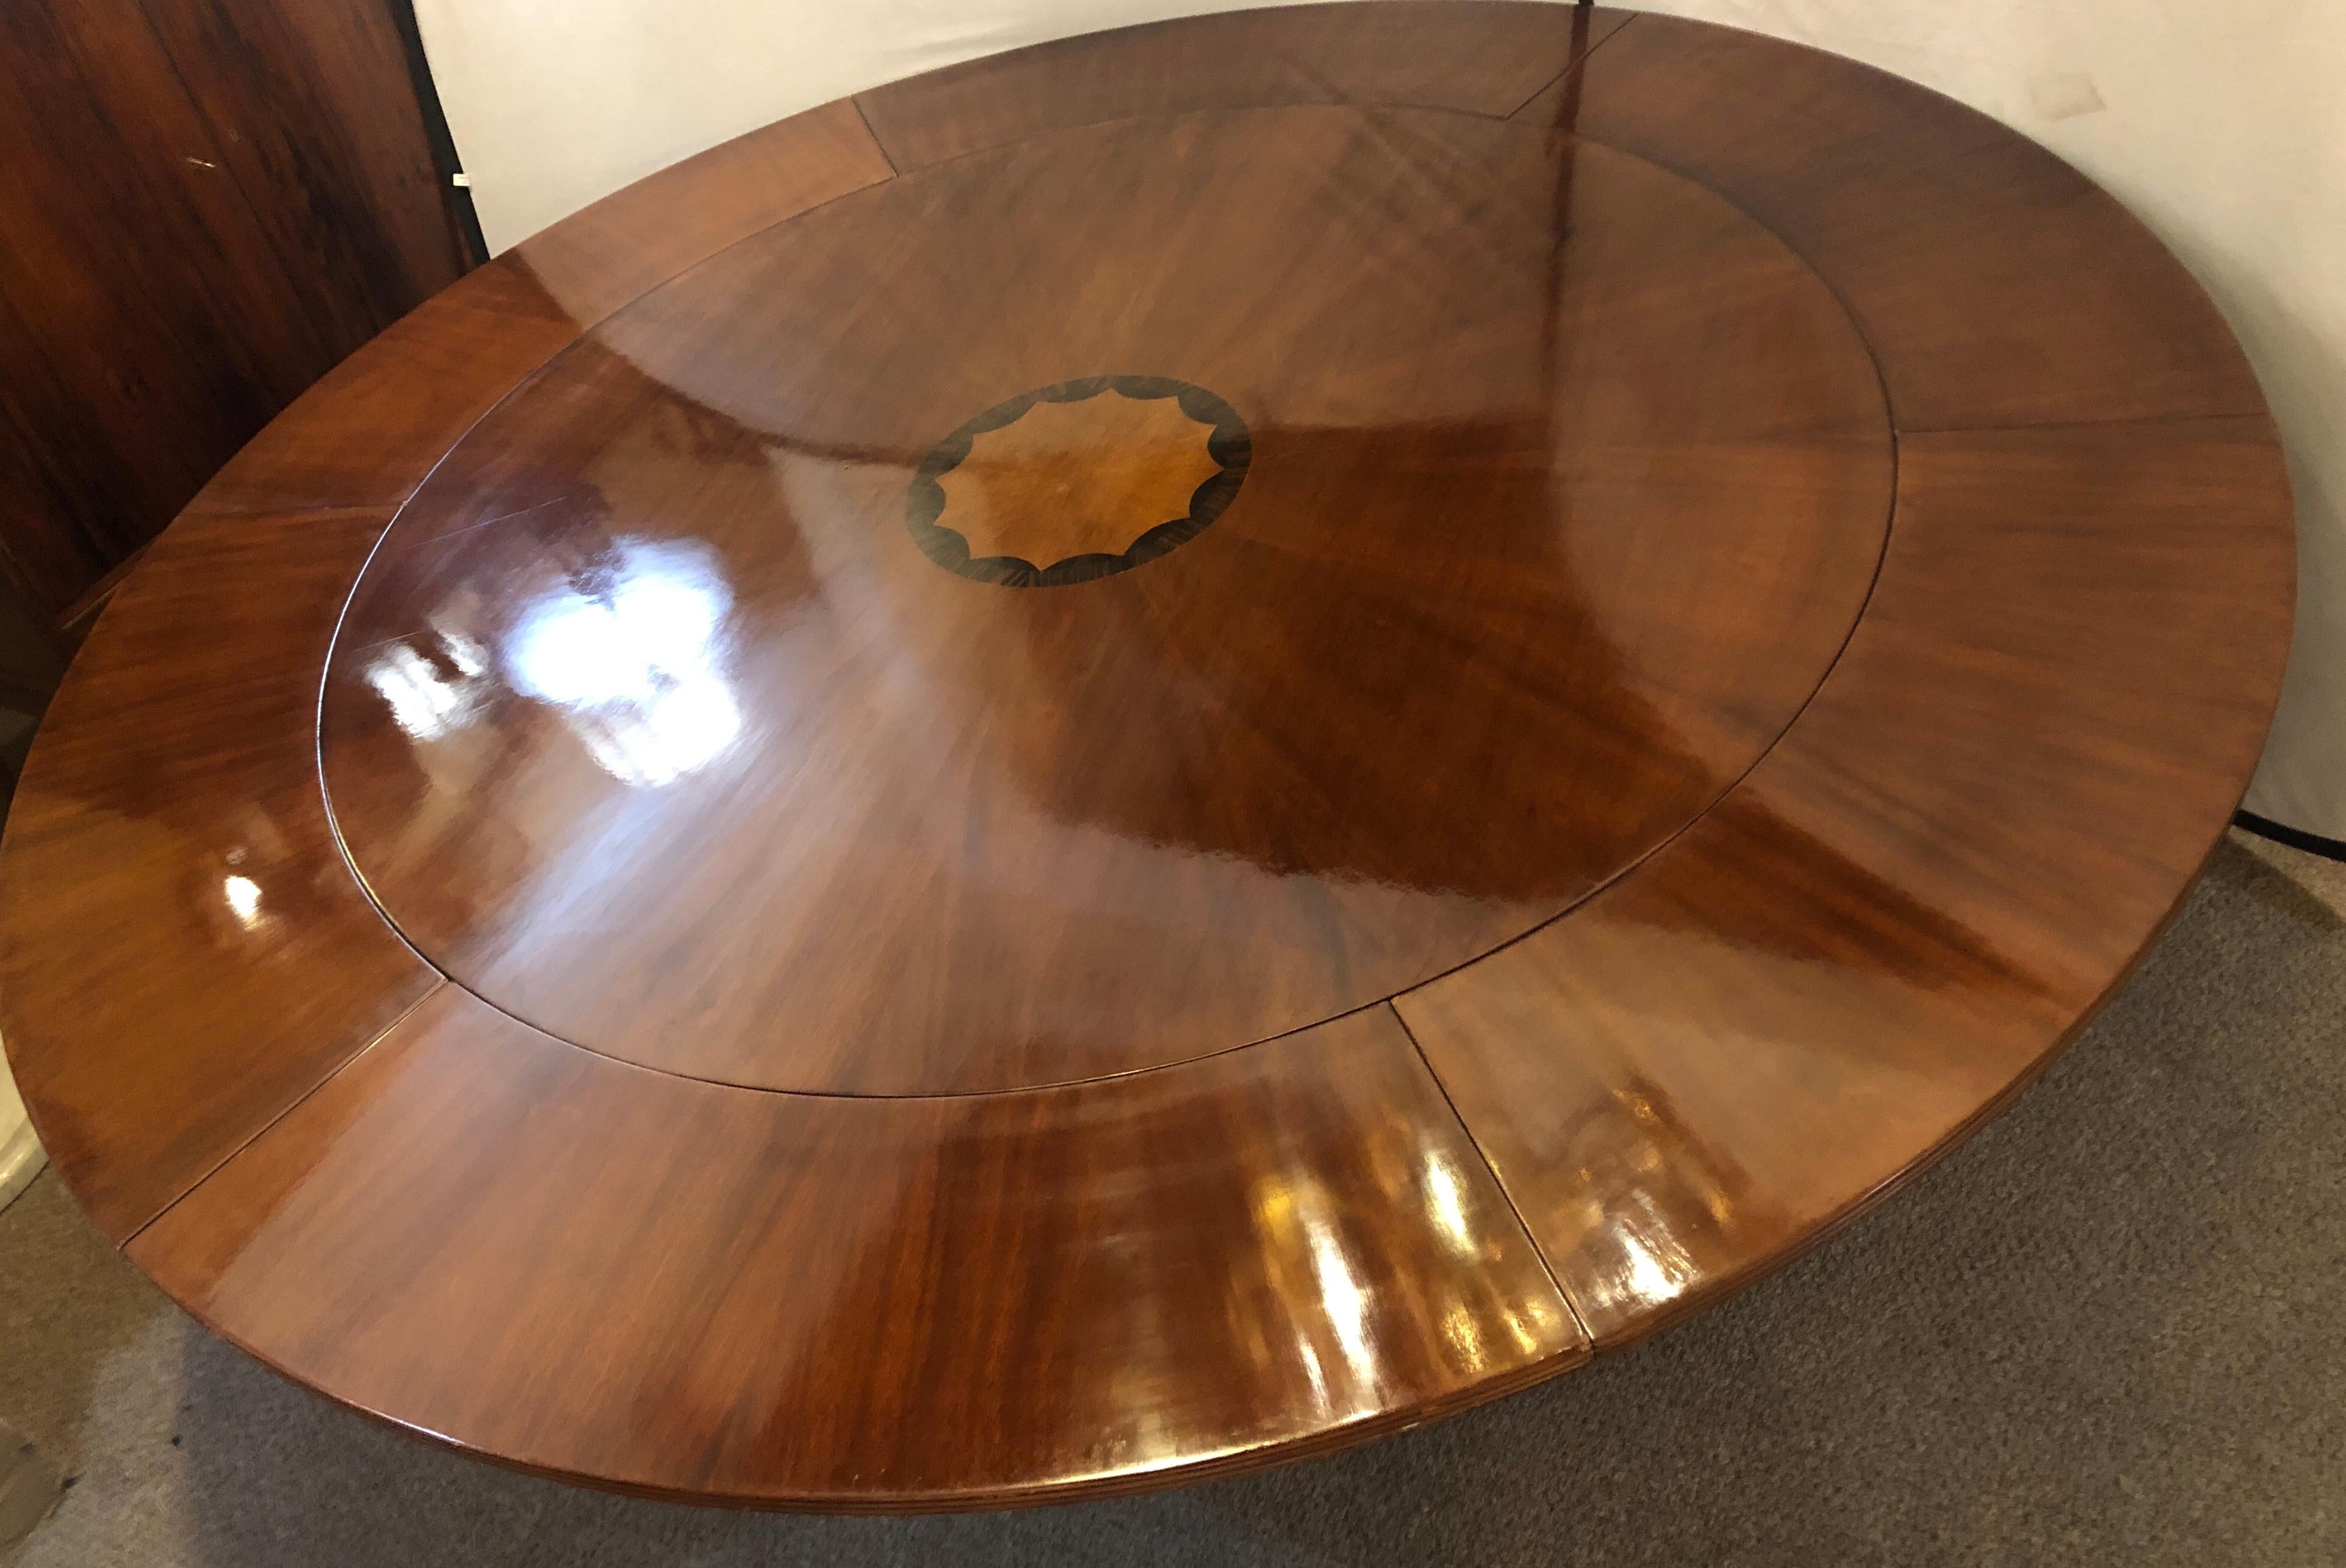 A John Stuart style circular inlaid expandable dining or center table. The sunburst table top sixty inches in diameter until it is fully extending with six leaves all measuring approximate 12 inches to an impressive 83.5 inches round. This table is